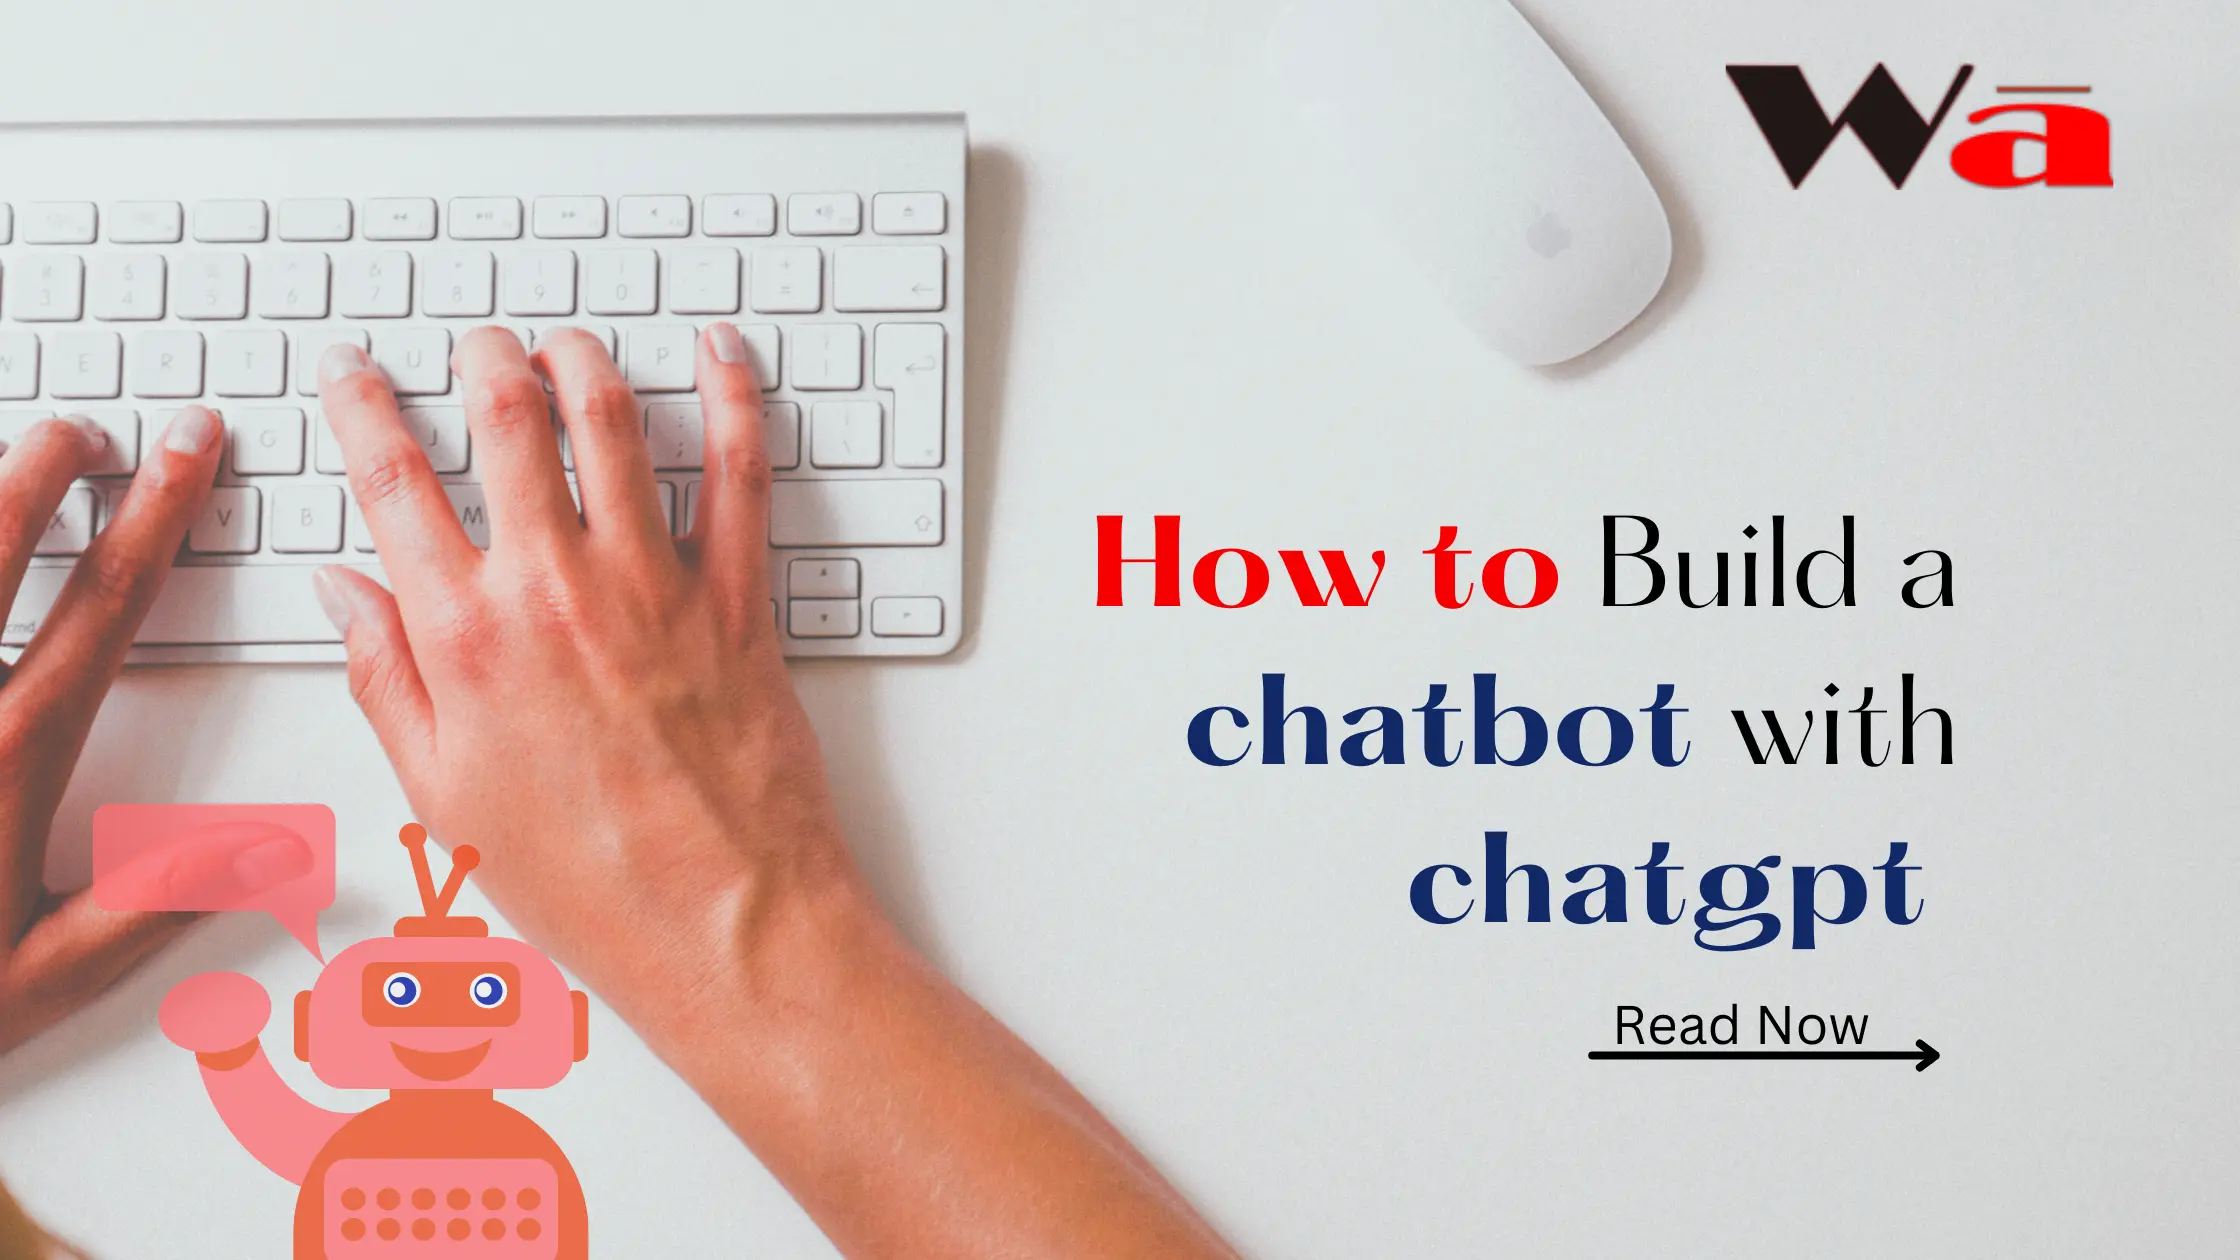 How to Build a chatbot with chatgpt